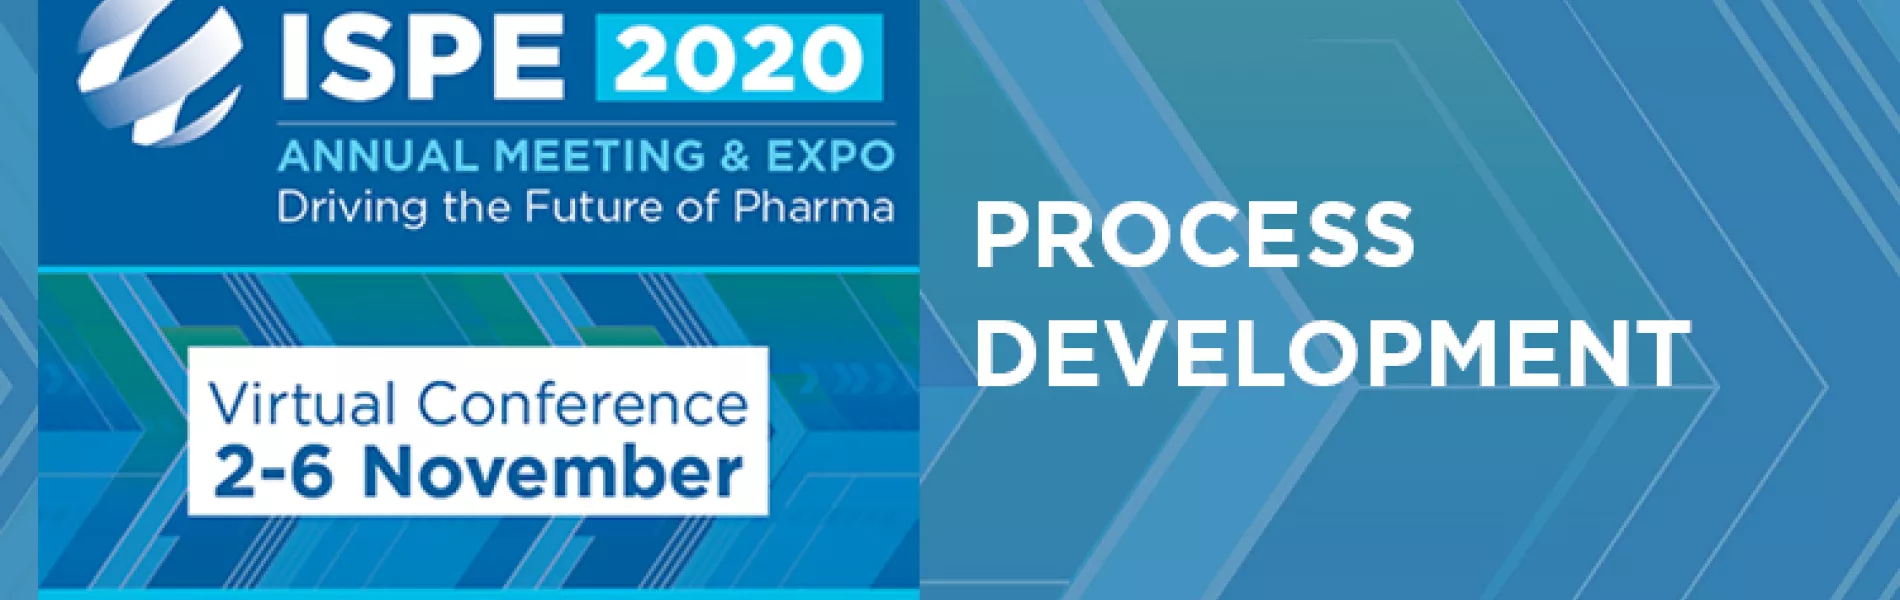 Innovations in Process Development and Manufacturing - Driving the Future of Pharma